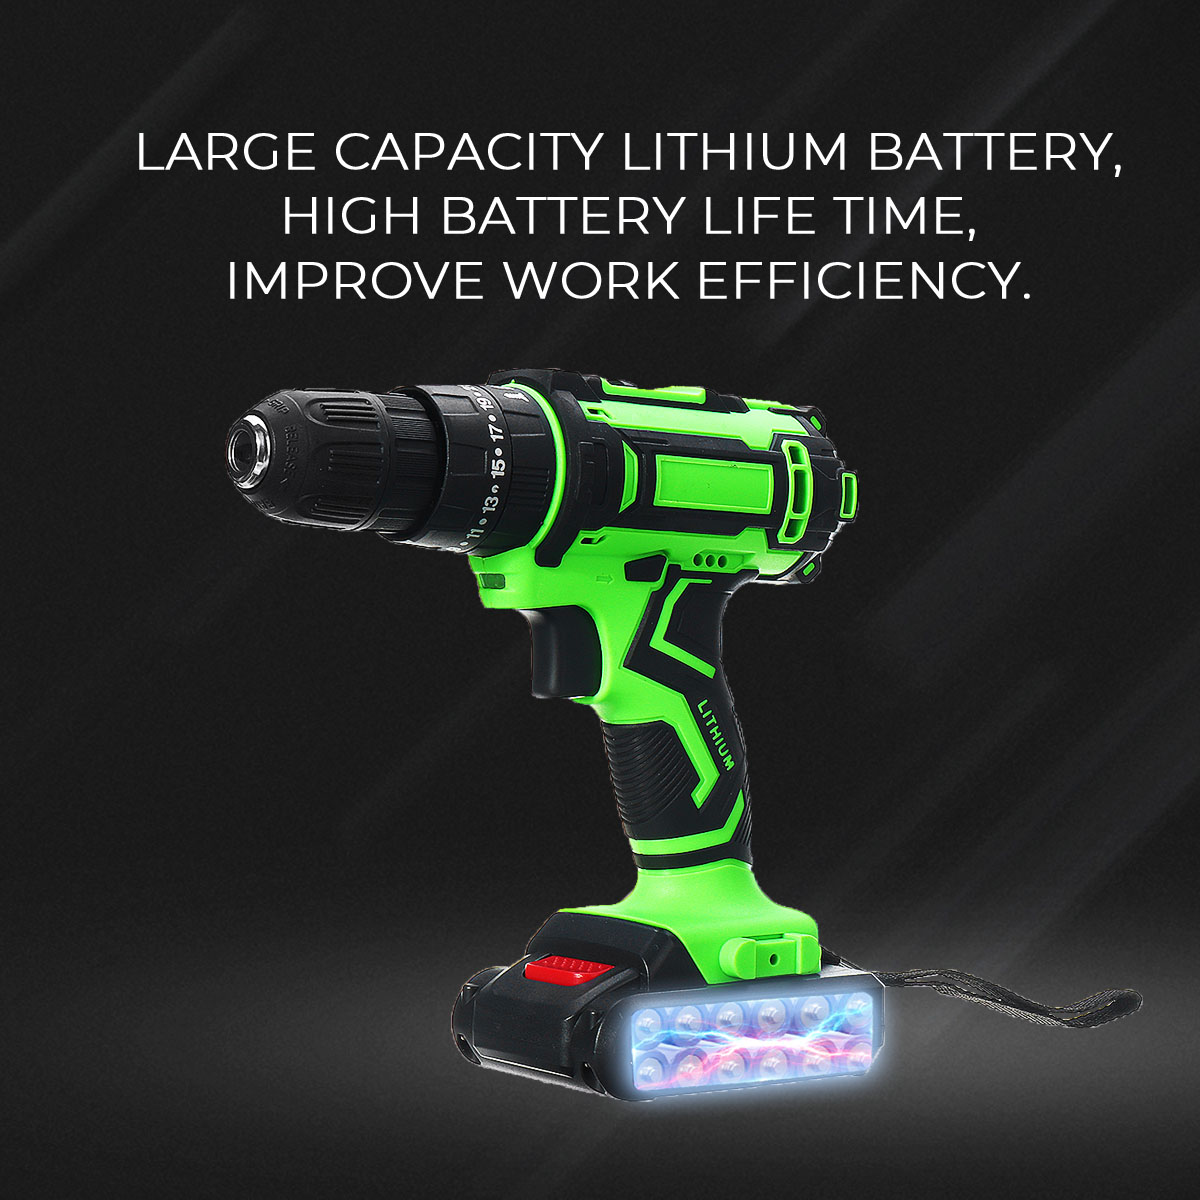 36V-Electric-Hand-Drill-Driver-253-Torque-Setting-Power-Drilling-DIY-Work-W-1-Or-2-Li-ion-battery-1582717-6